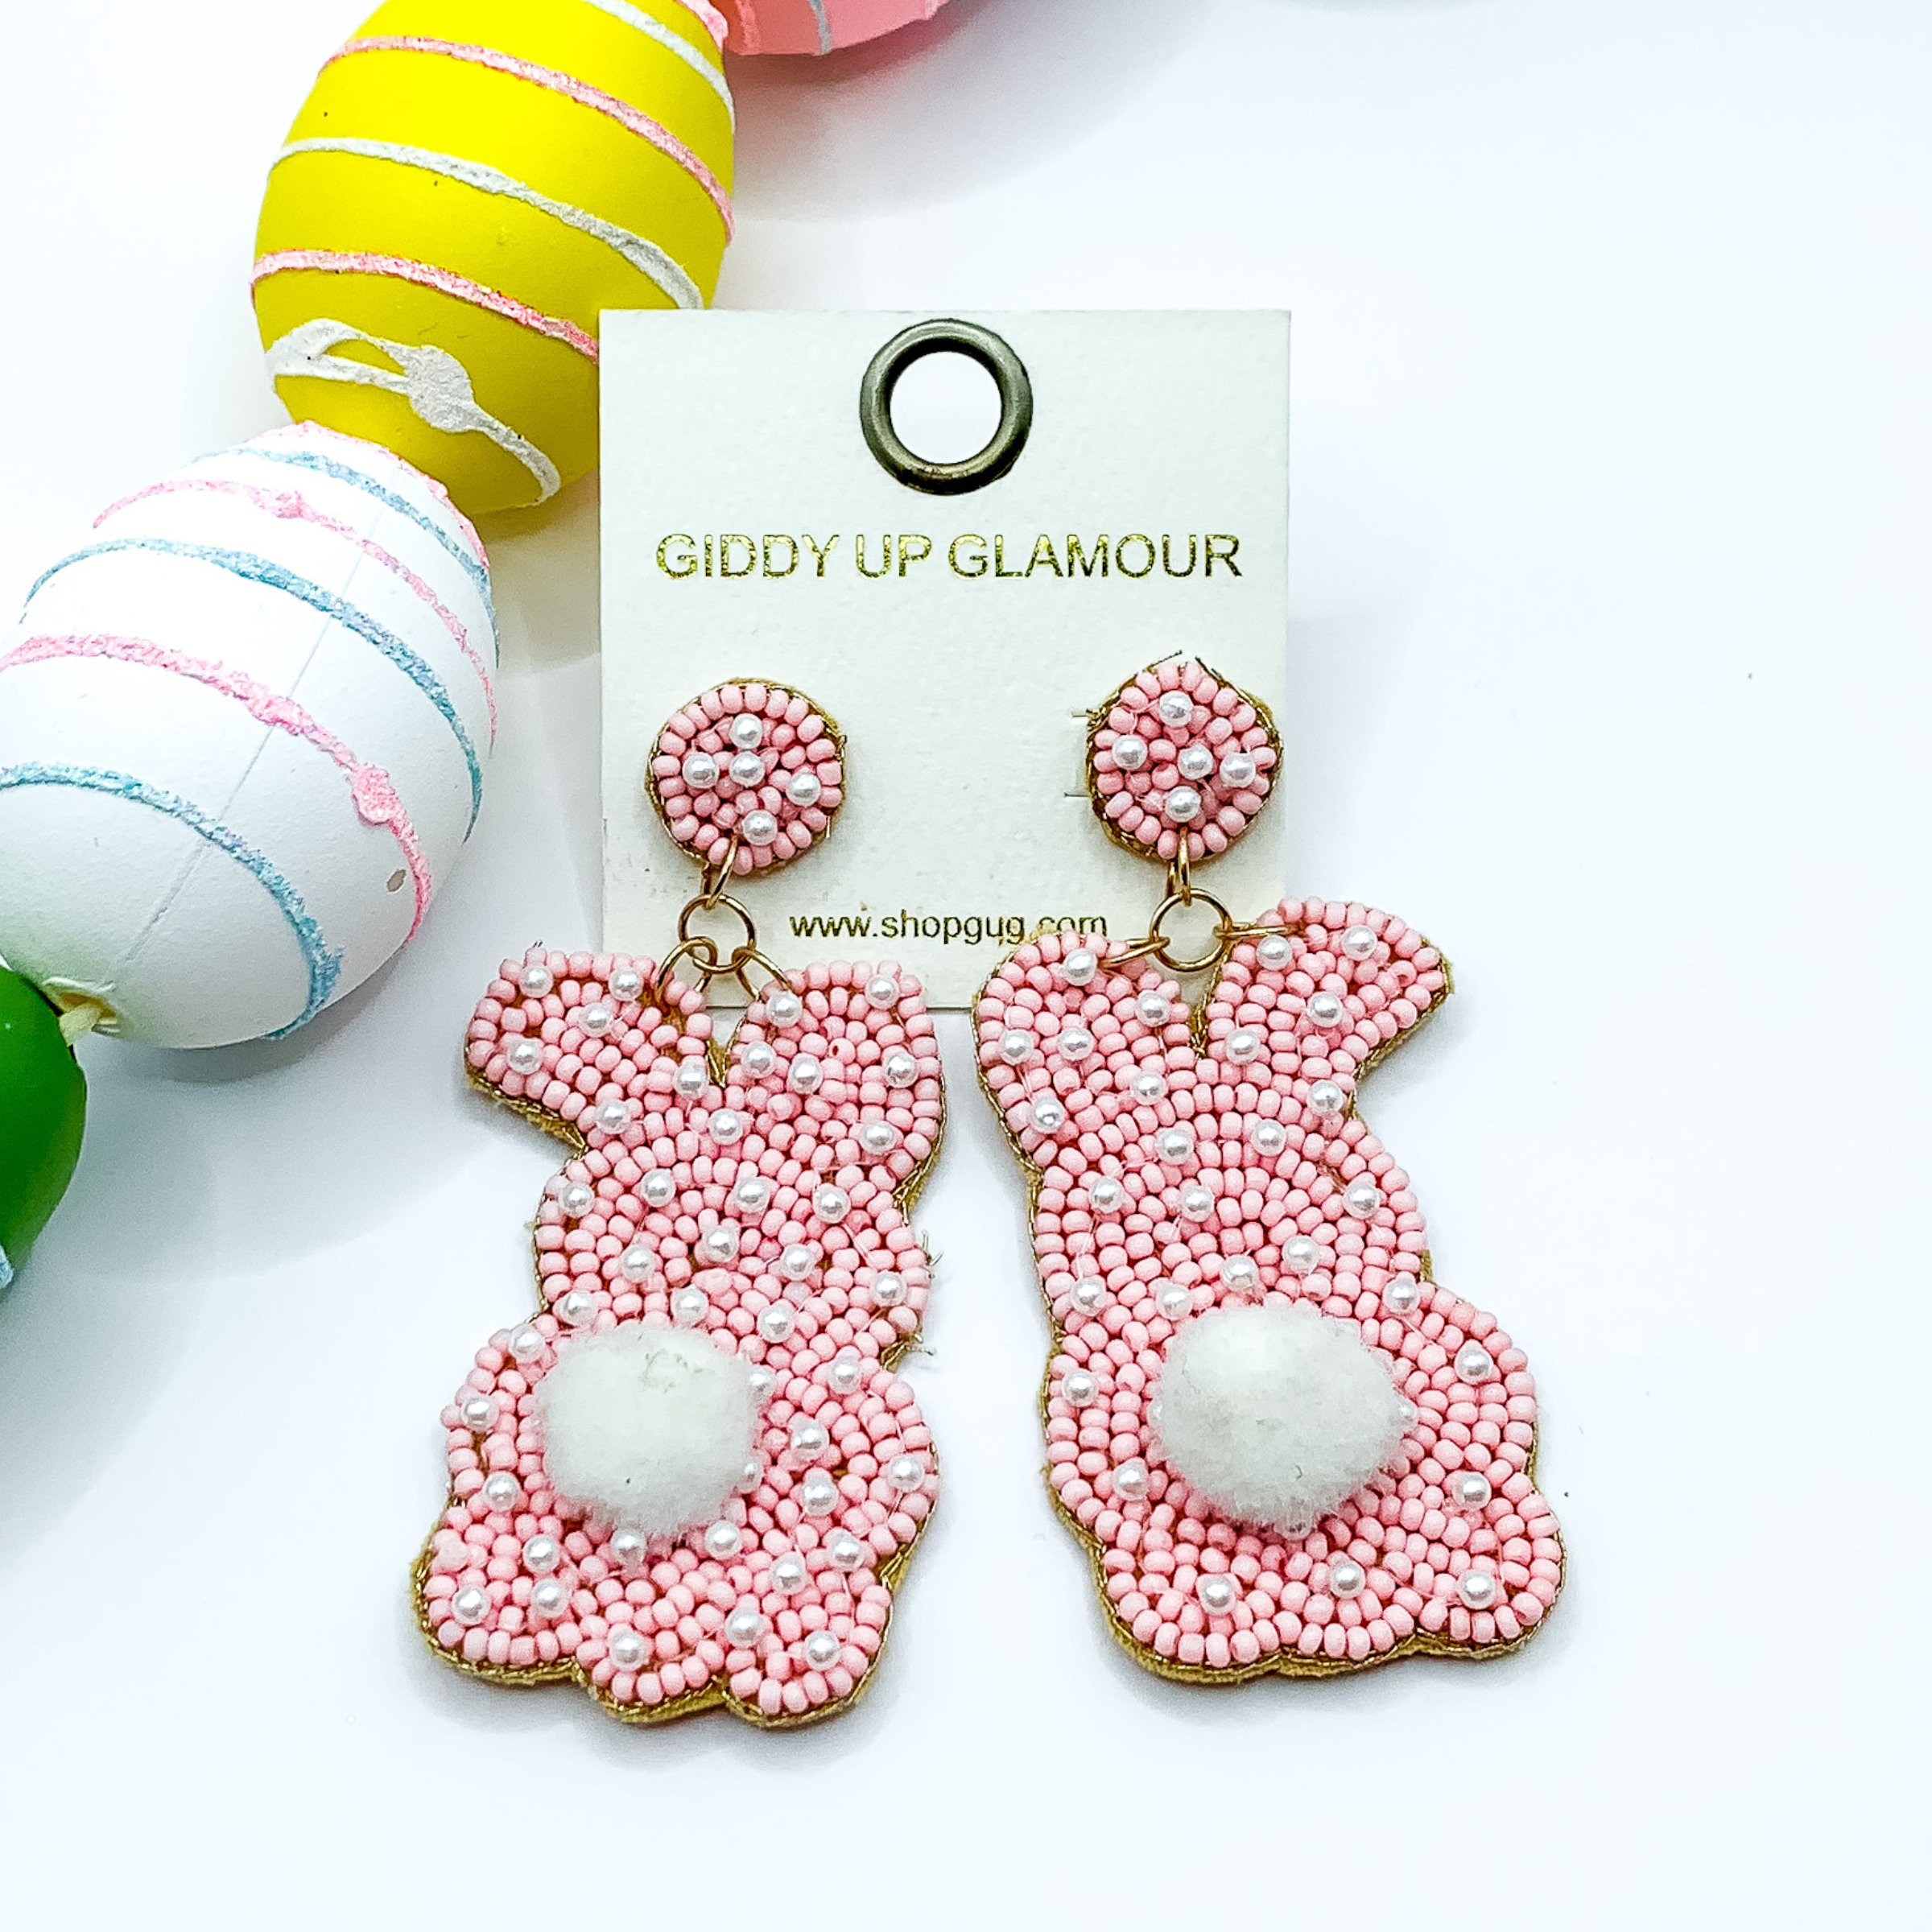 Beaded, baby pink bunny rabbit earrings with a white puff ball for a tail and a white beaded print. Pictured on white background with colorful Easter eggs.